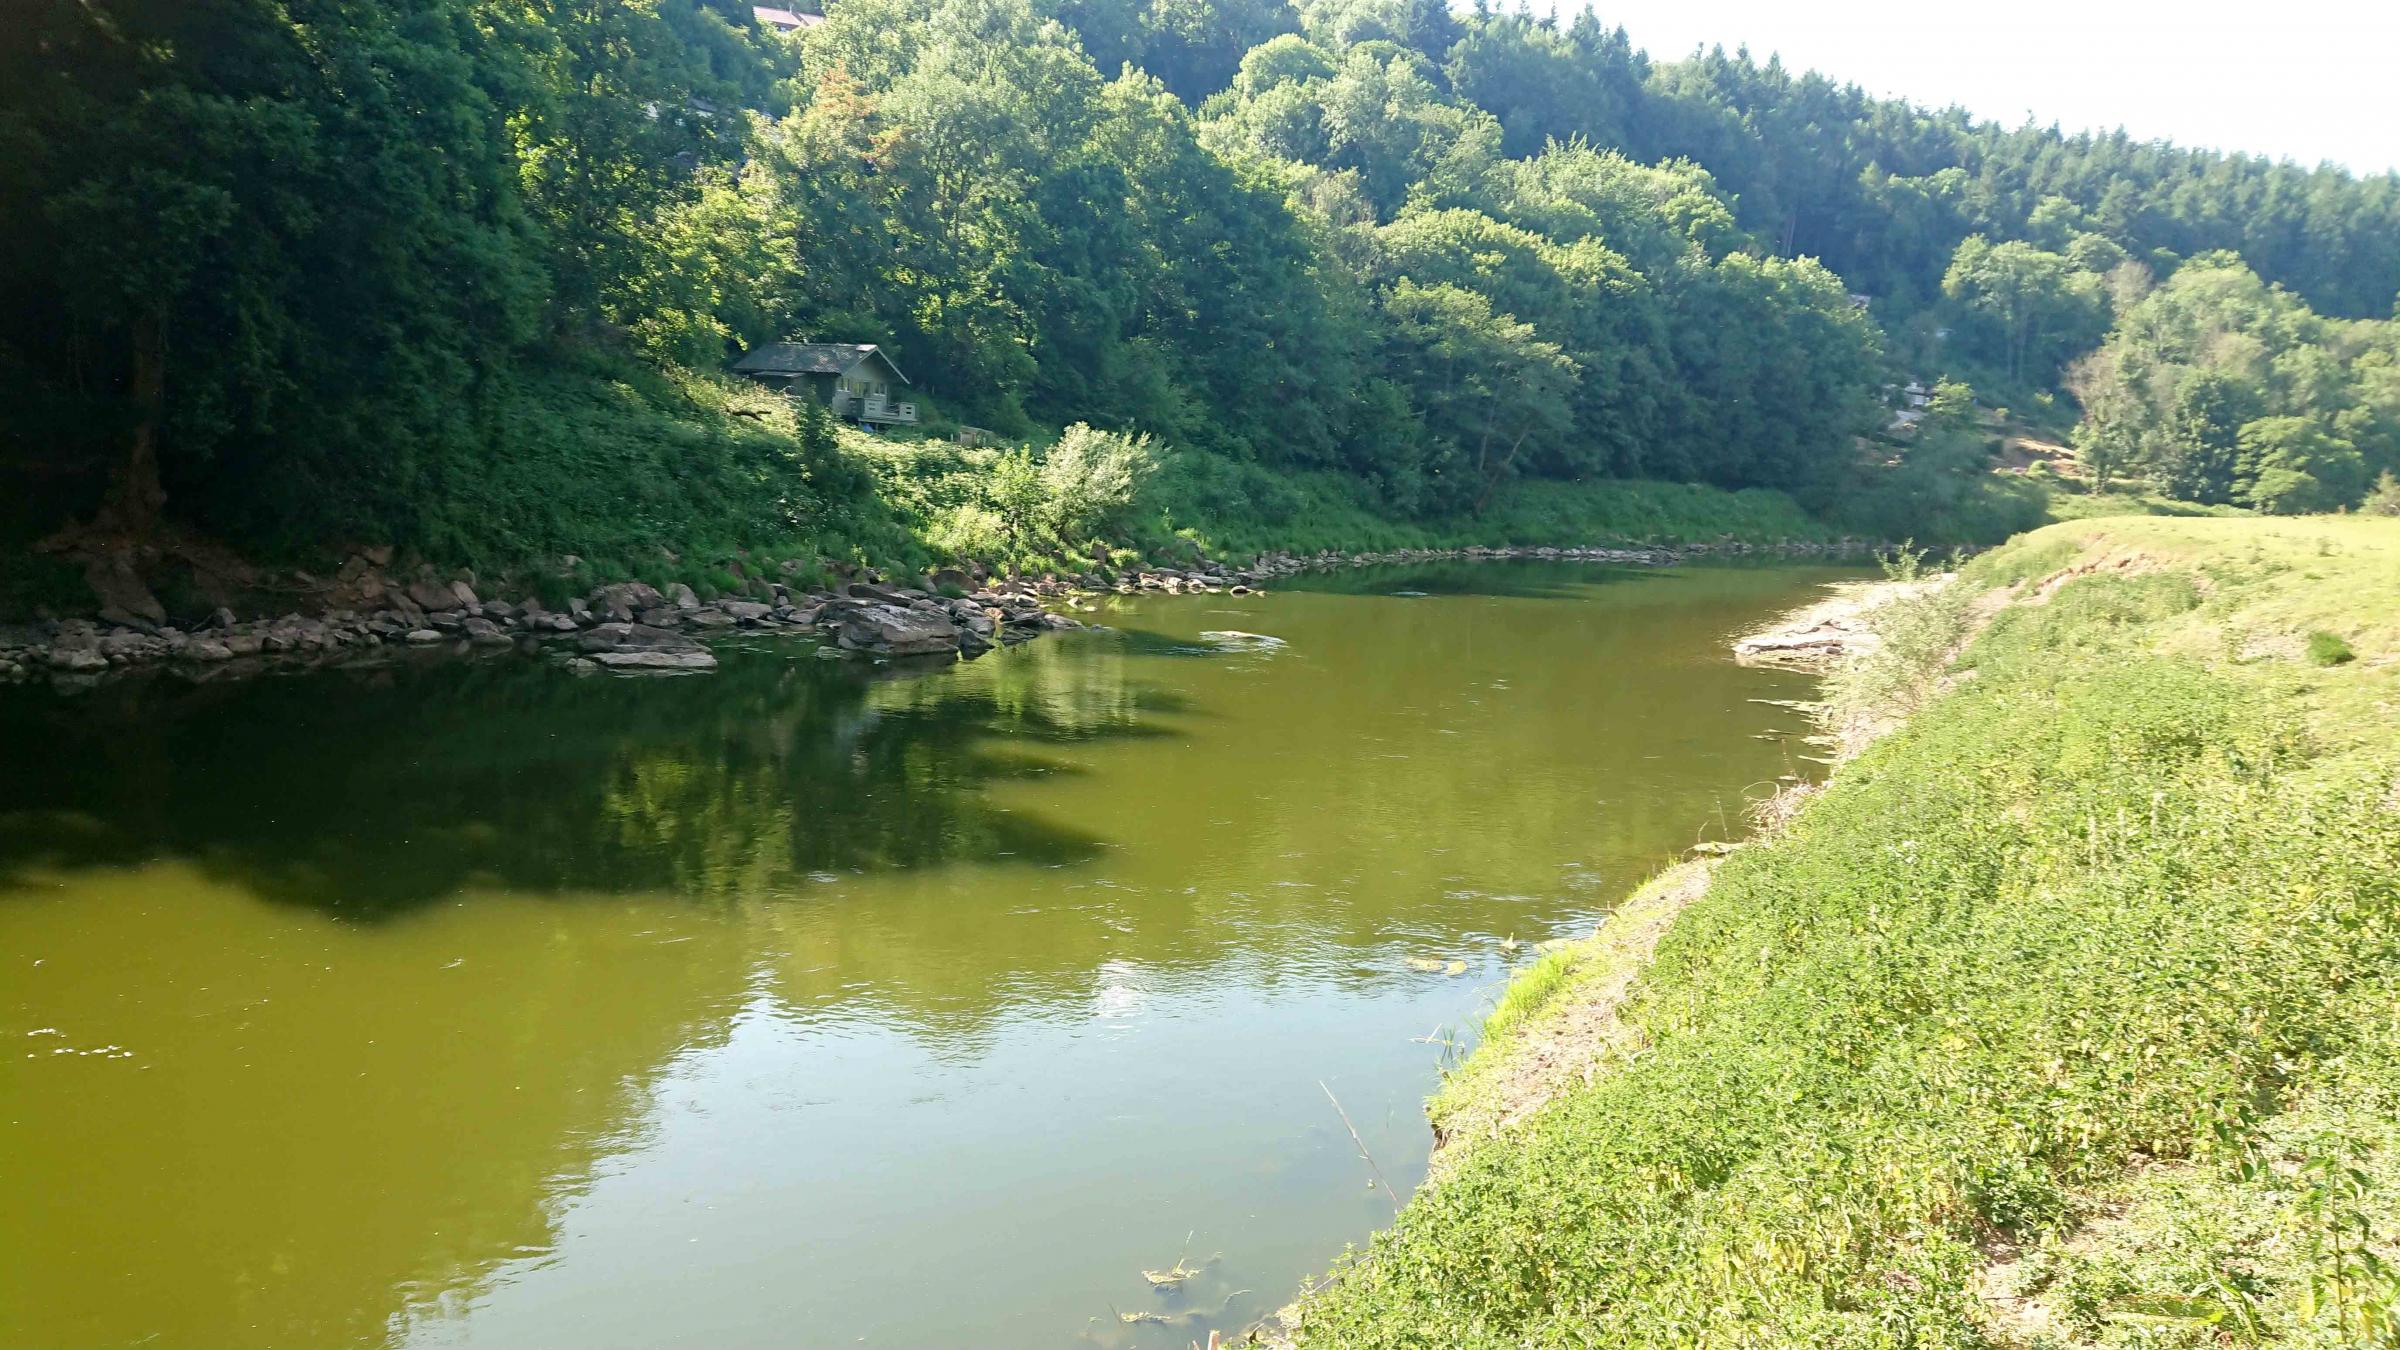 The River Wye at Redbrook turned green because of algal blooms in June 2020 